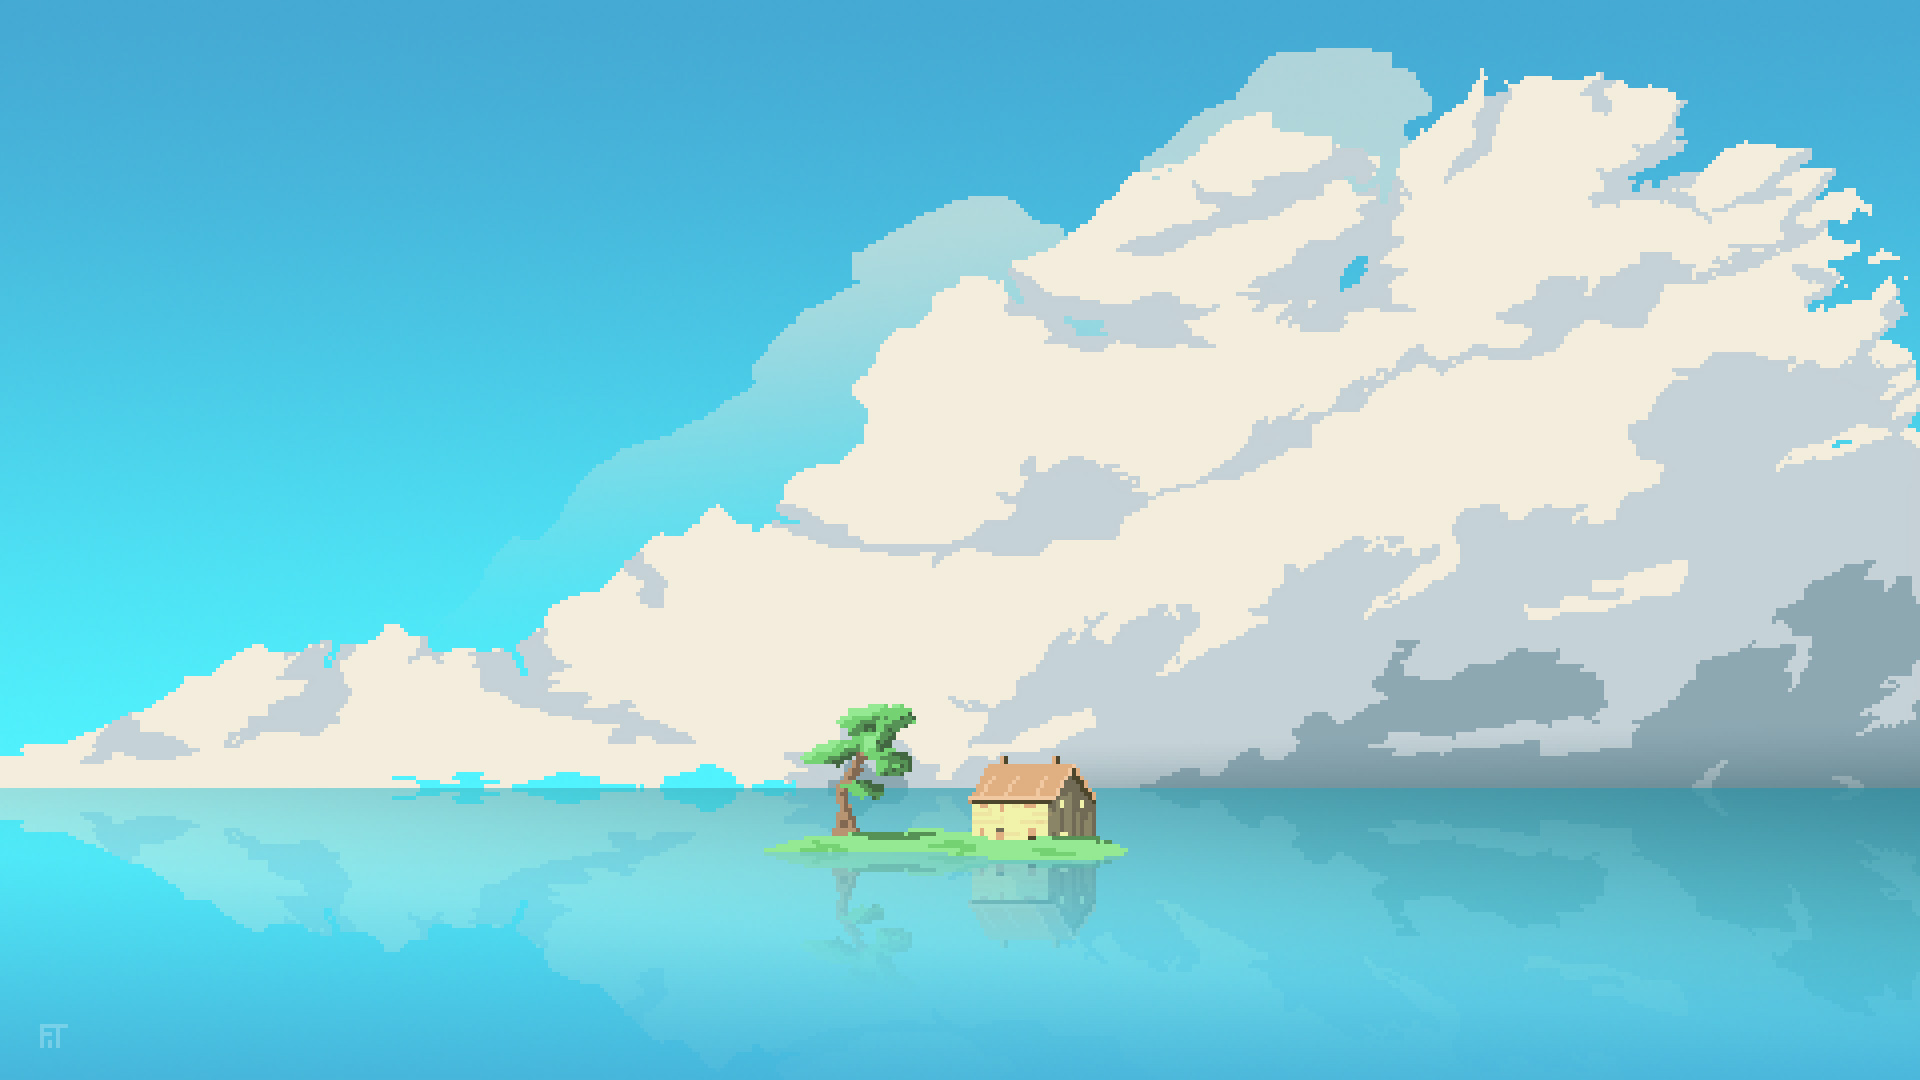 8 Bit Artwork House Island In Middle Of Water Hd Artist 4k Wallpapers Images Backgrounds Photos And Pictures